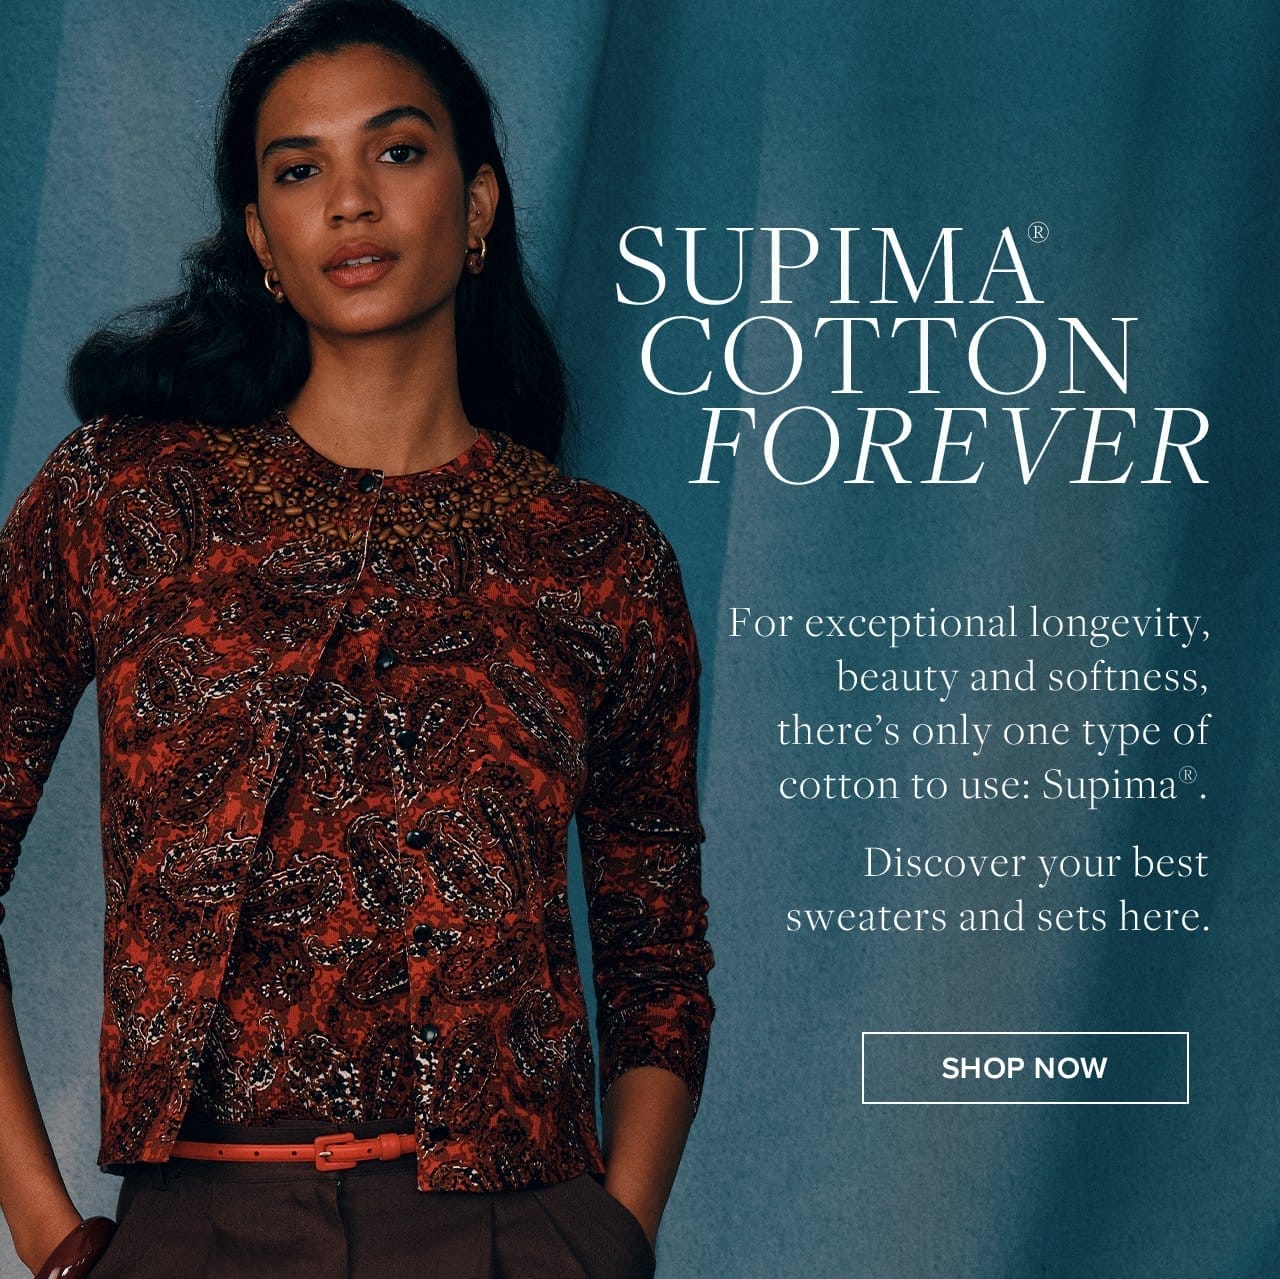 Supima Cotton Forever For exceptional longevity, beauty and softness, there's only one type of cotton to use: Supima. Discover your best sweaters and sets here. Shop Now